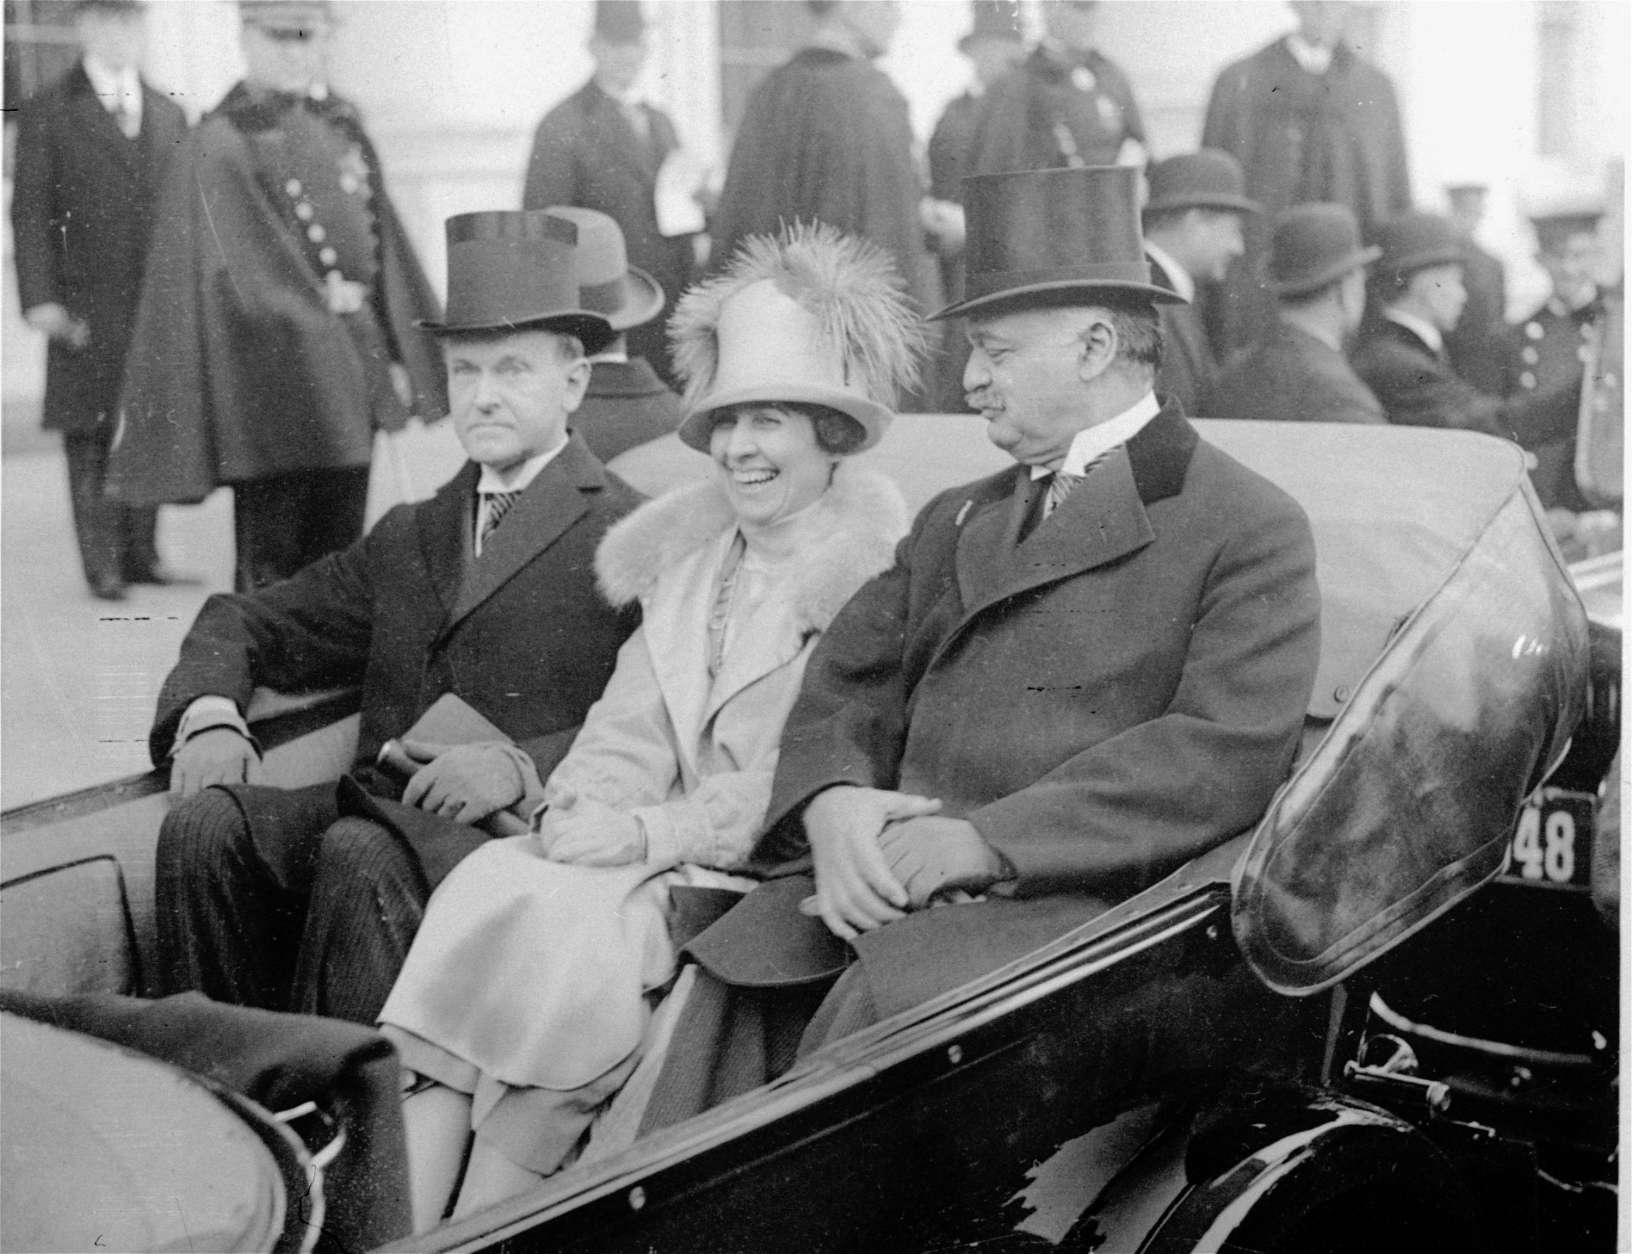 Calvin Coolidge, left, wears wing collar and muted top hat en route to take oath on inauguration day, March 4, 1925. (AP Photo)